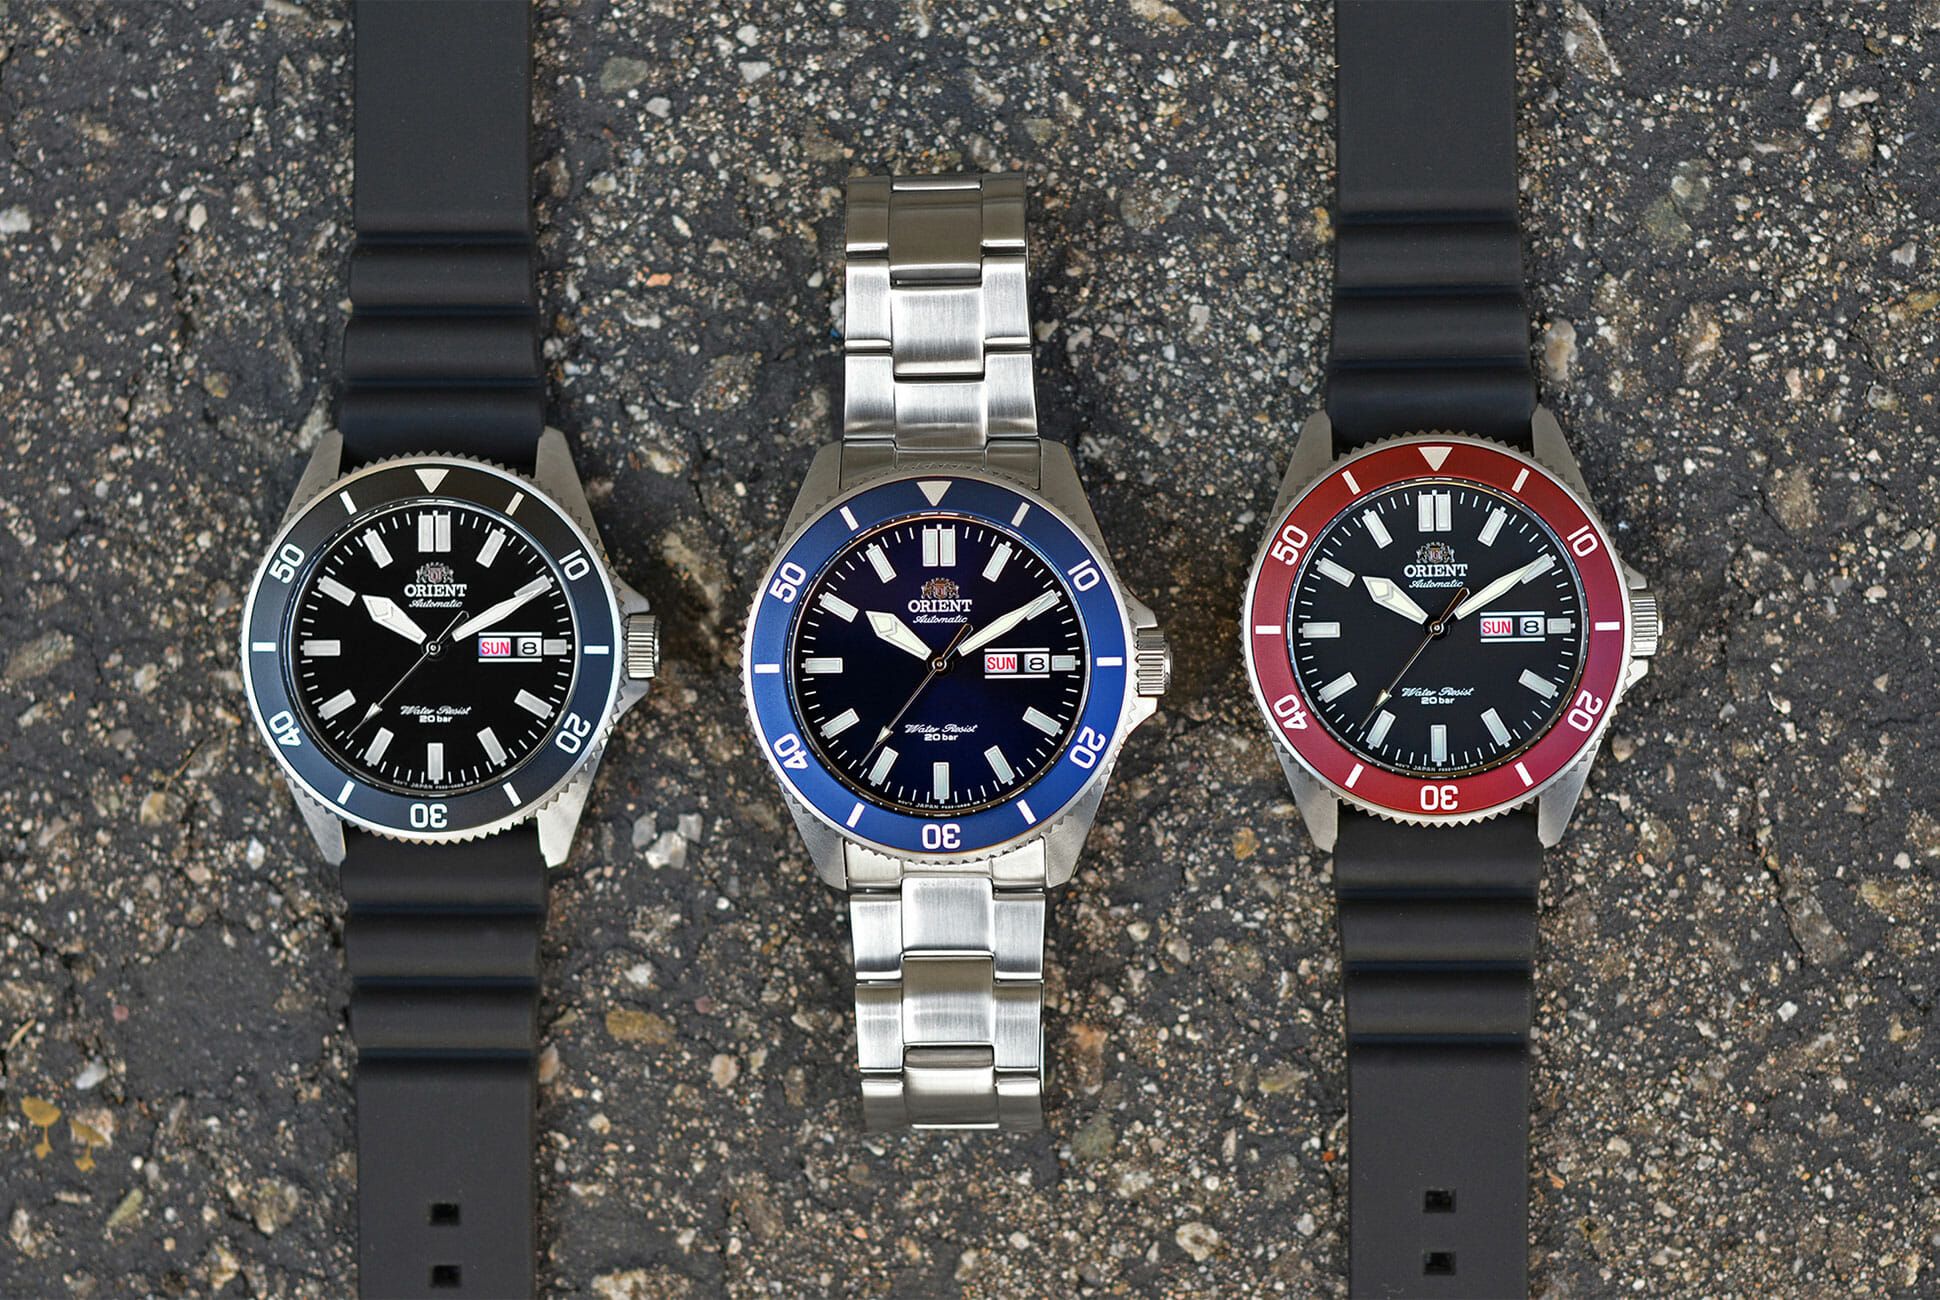 Has Released a Affordable Dive Watch